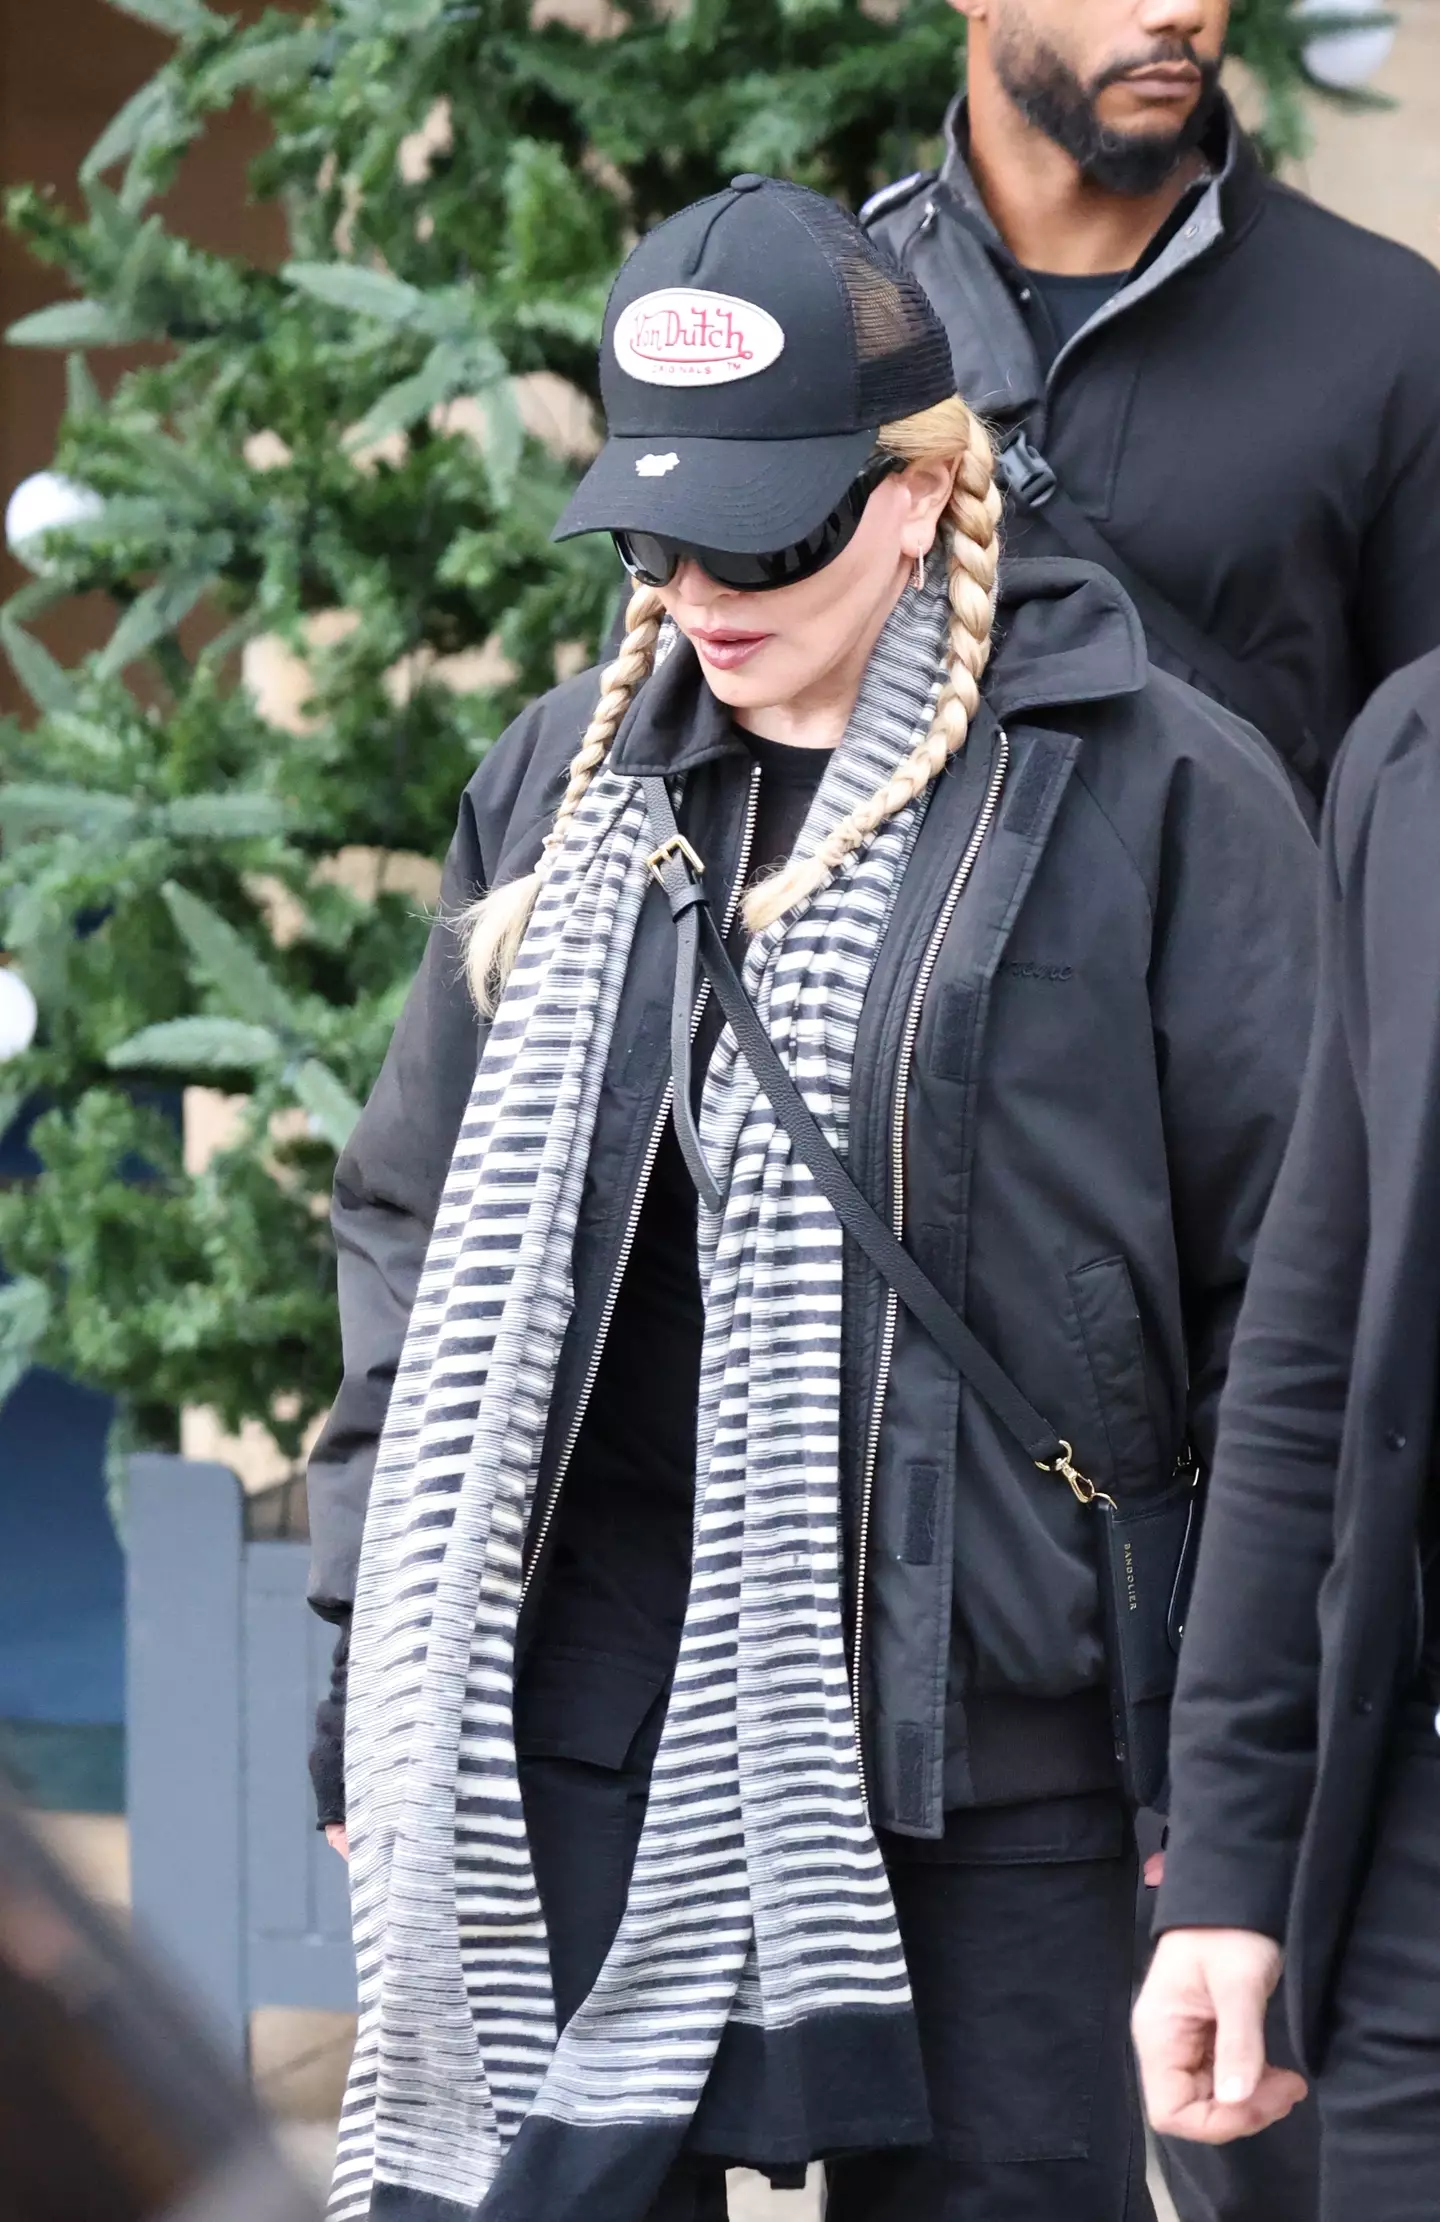 Madonna was rushed to the intensive care unit last year.